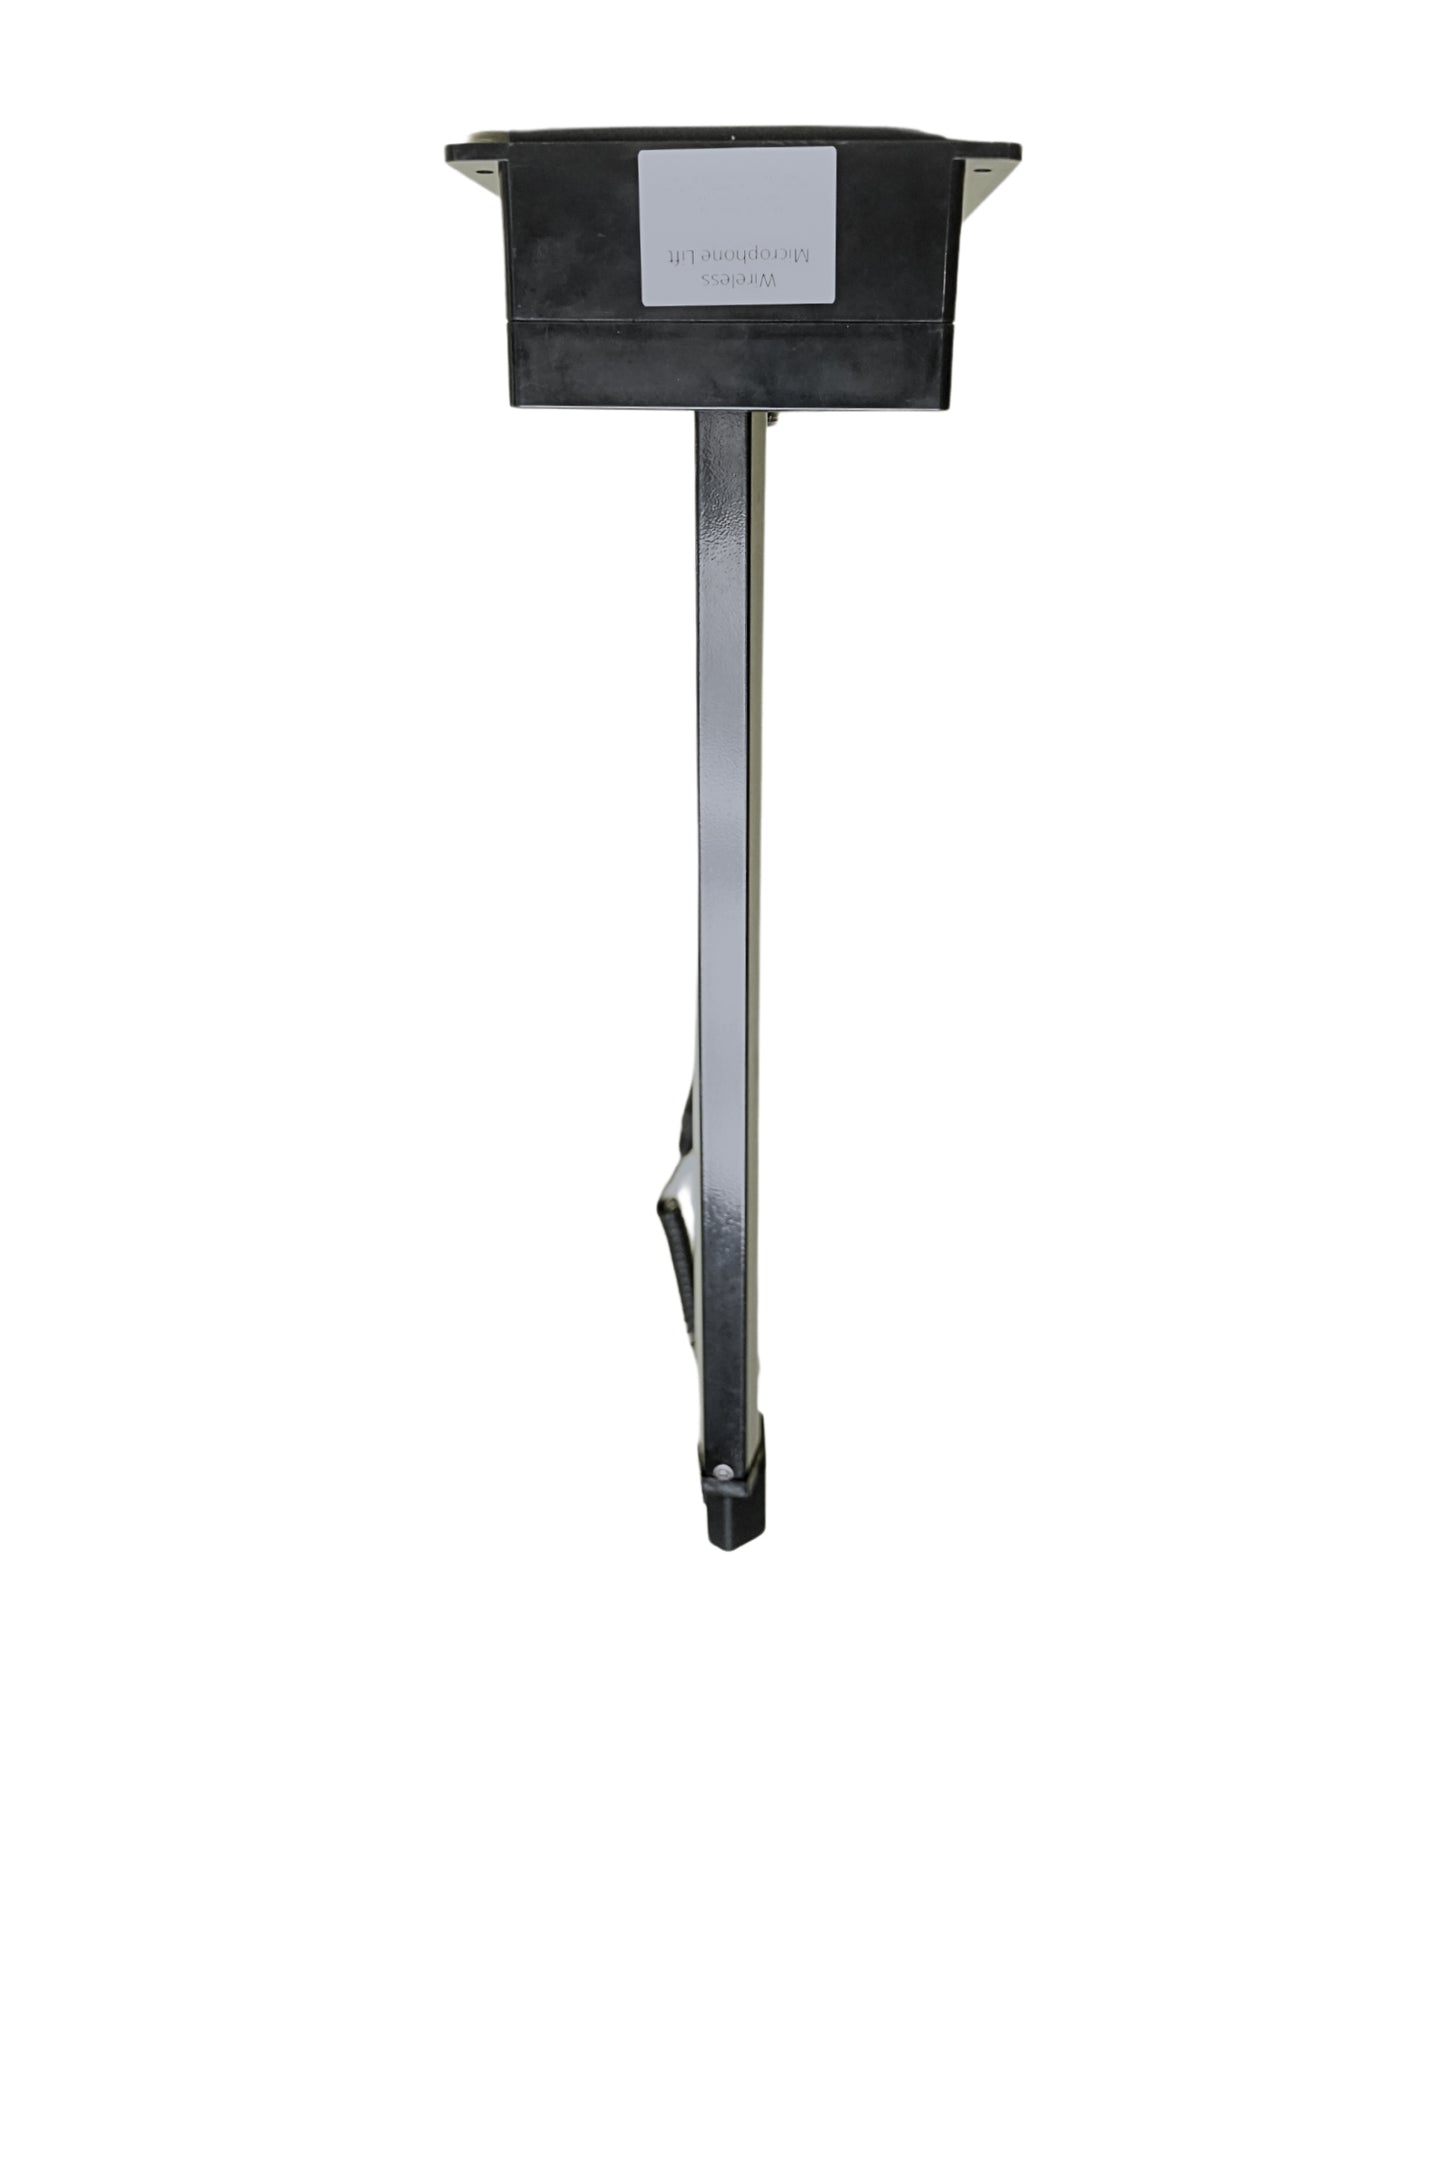 Adjustable Microphone Lift with Remote Control Ceiling Mount